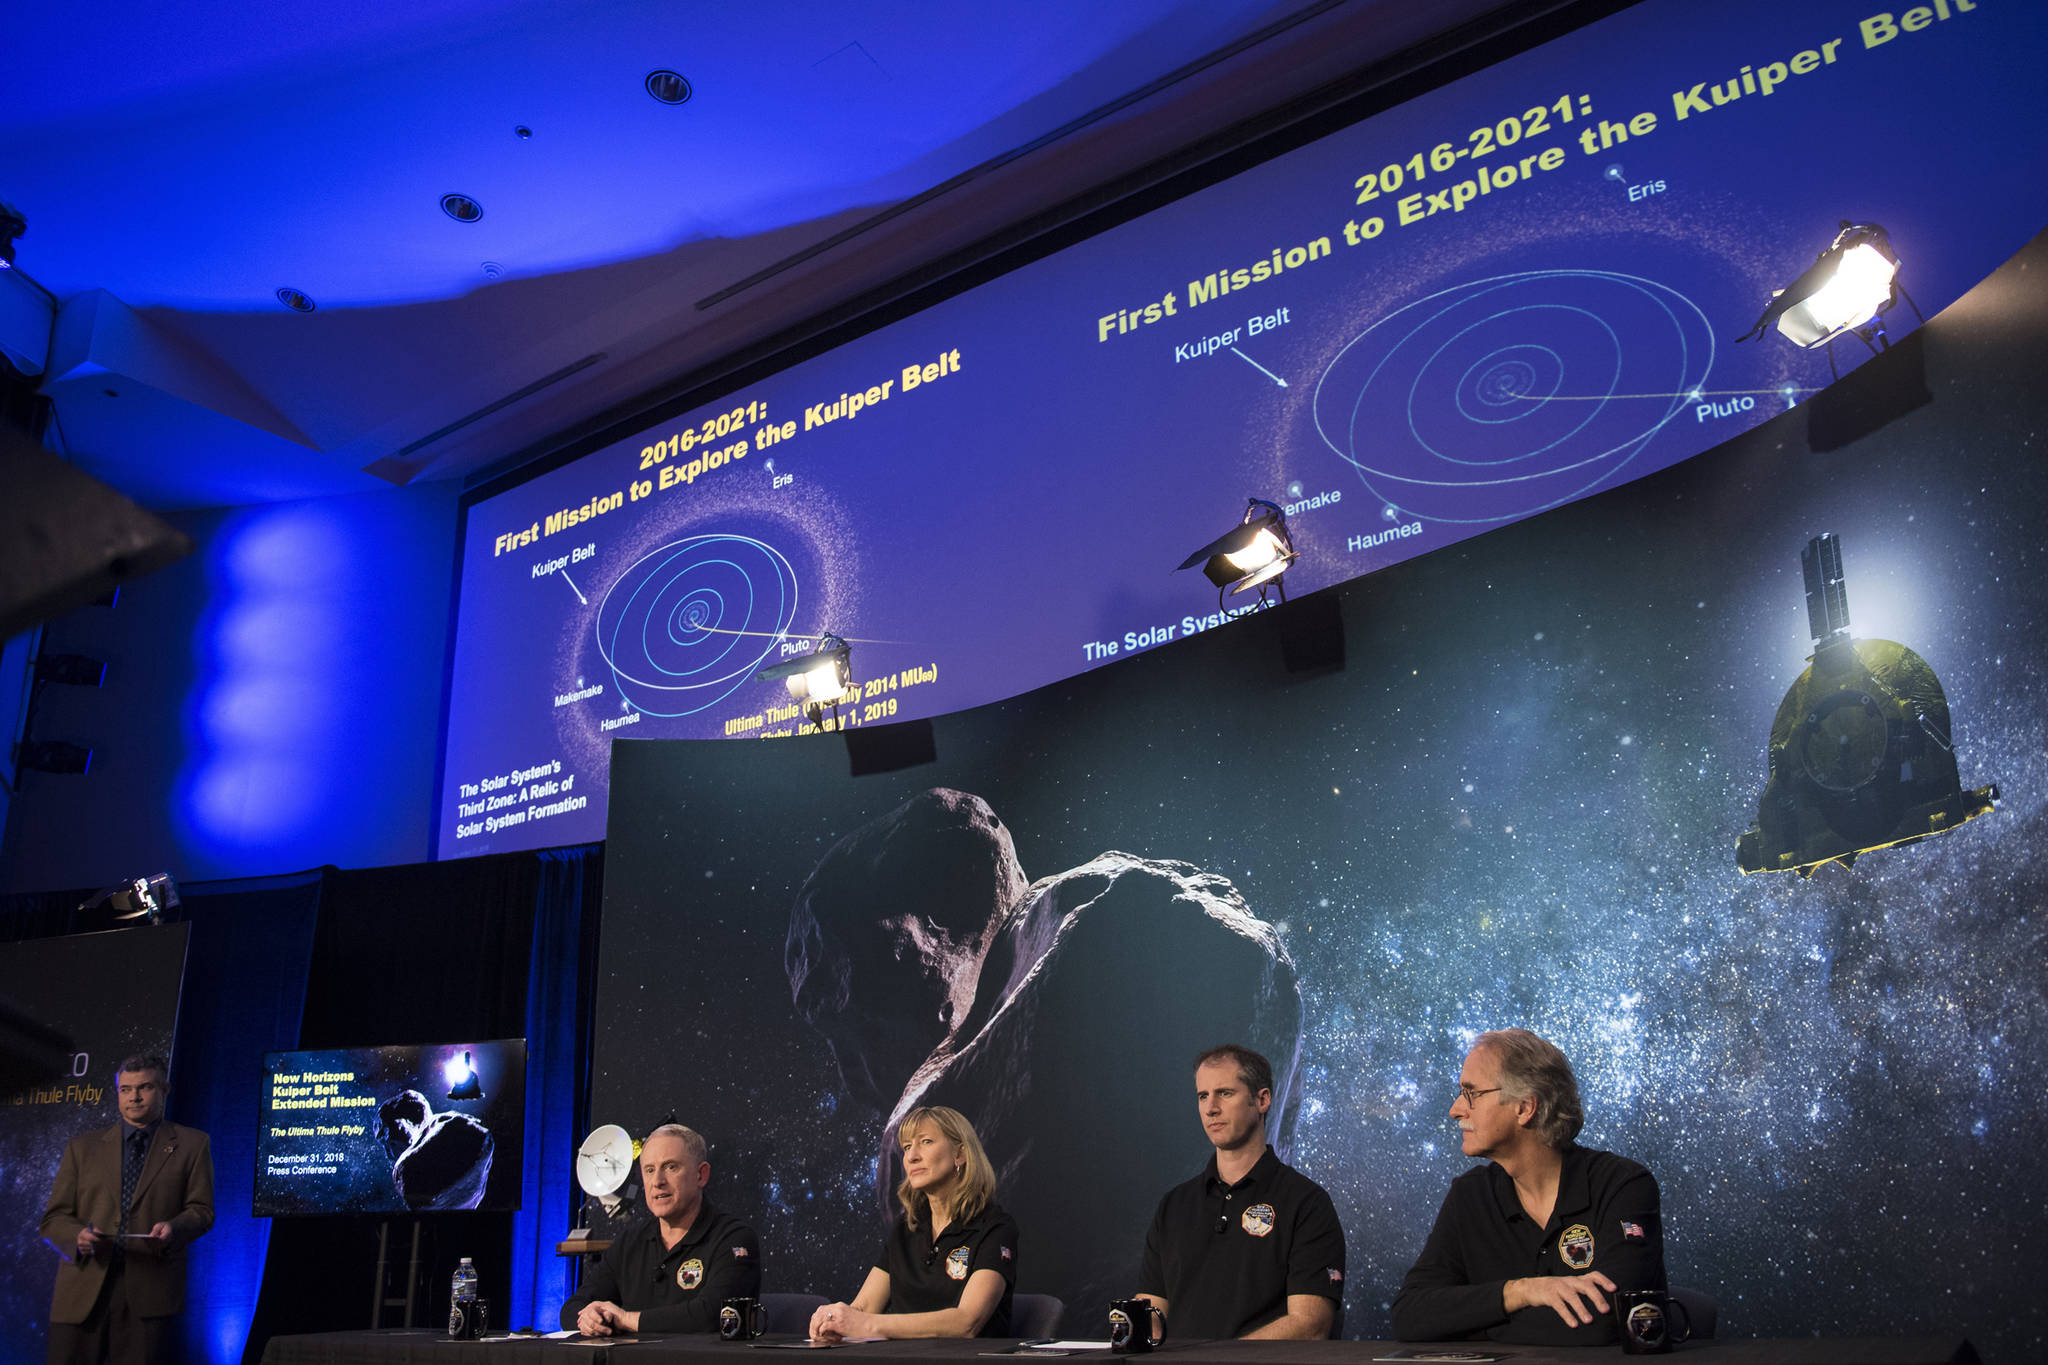 New Horizons principal investigator Alan Stern of the Southwest Research Institute, left, New Horizons project manager Helene Winters of the Johns Hopkins University Applied Physics Laboratory, second from left, Fred Pelletier, lead of the project navigation team at KinetX Inc., second from right, and New Horizons co-investigator John Spencer of the Southwest Research Institute, right, are seen during a press conference prior to the flyby of Ultima Thule by the New Horizons spacecraft, Monday, Dec. 31, 2018 at Johns Hopkins University Applied Physics Laboratory (APL) in Laurel, Maryland. (Joel Kowsky | NASA via the Associated Press)